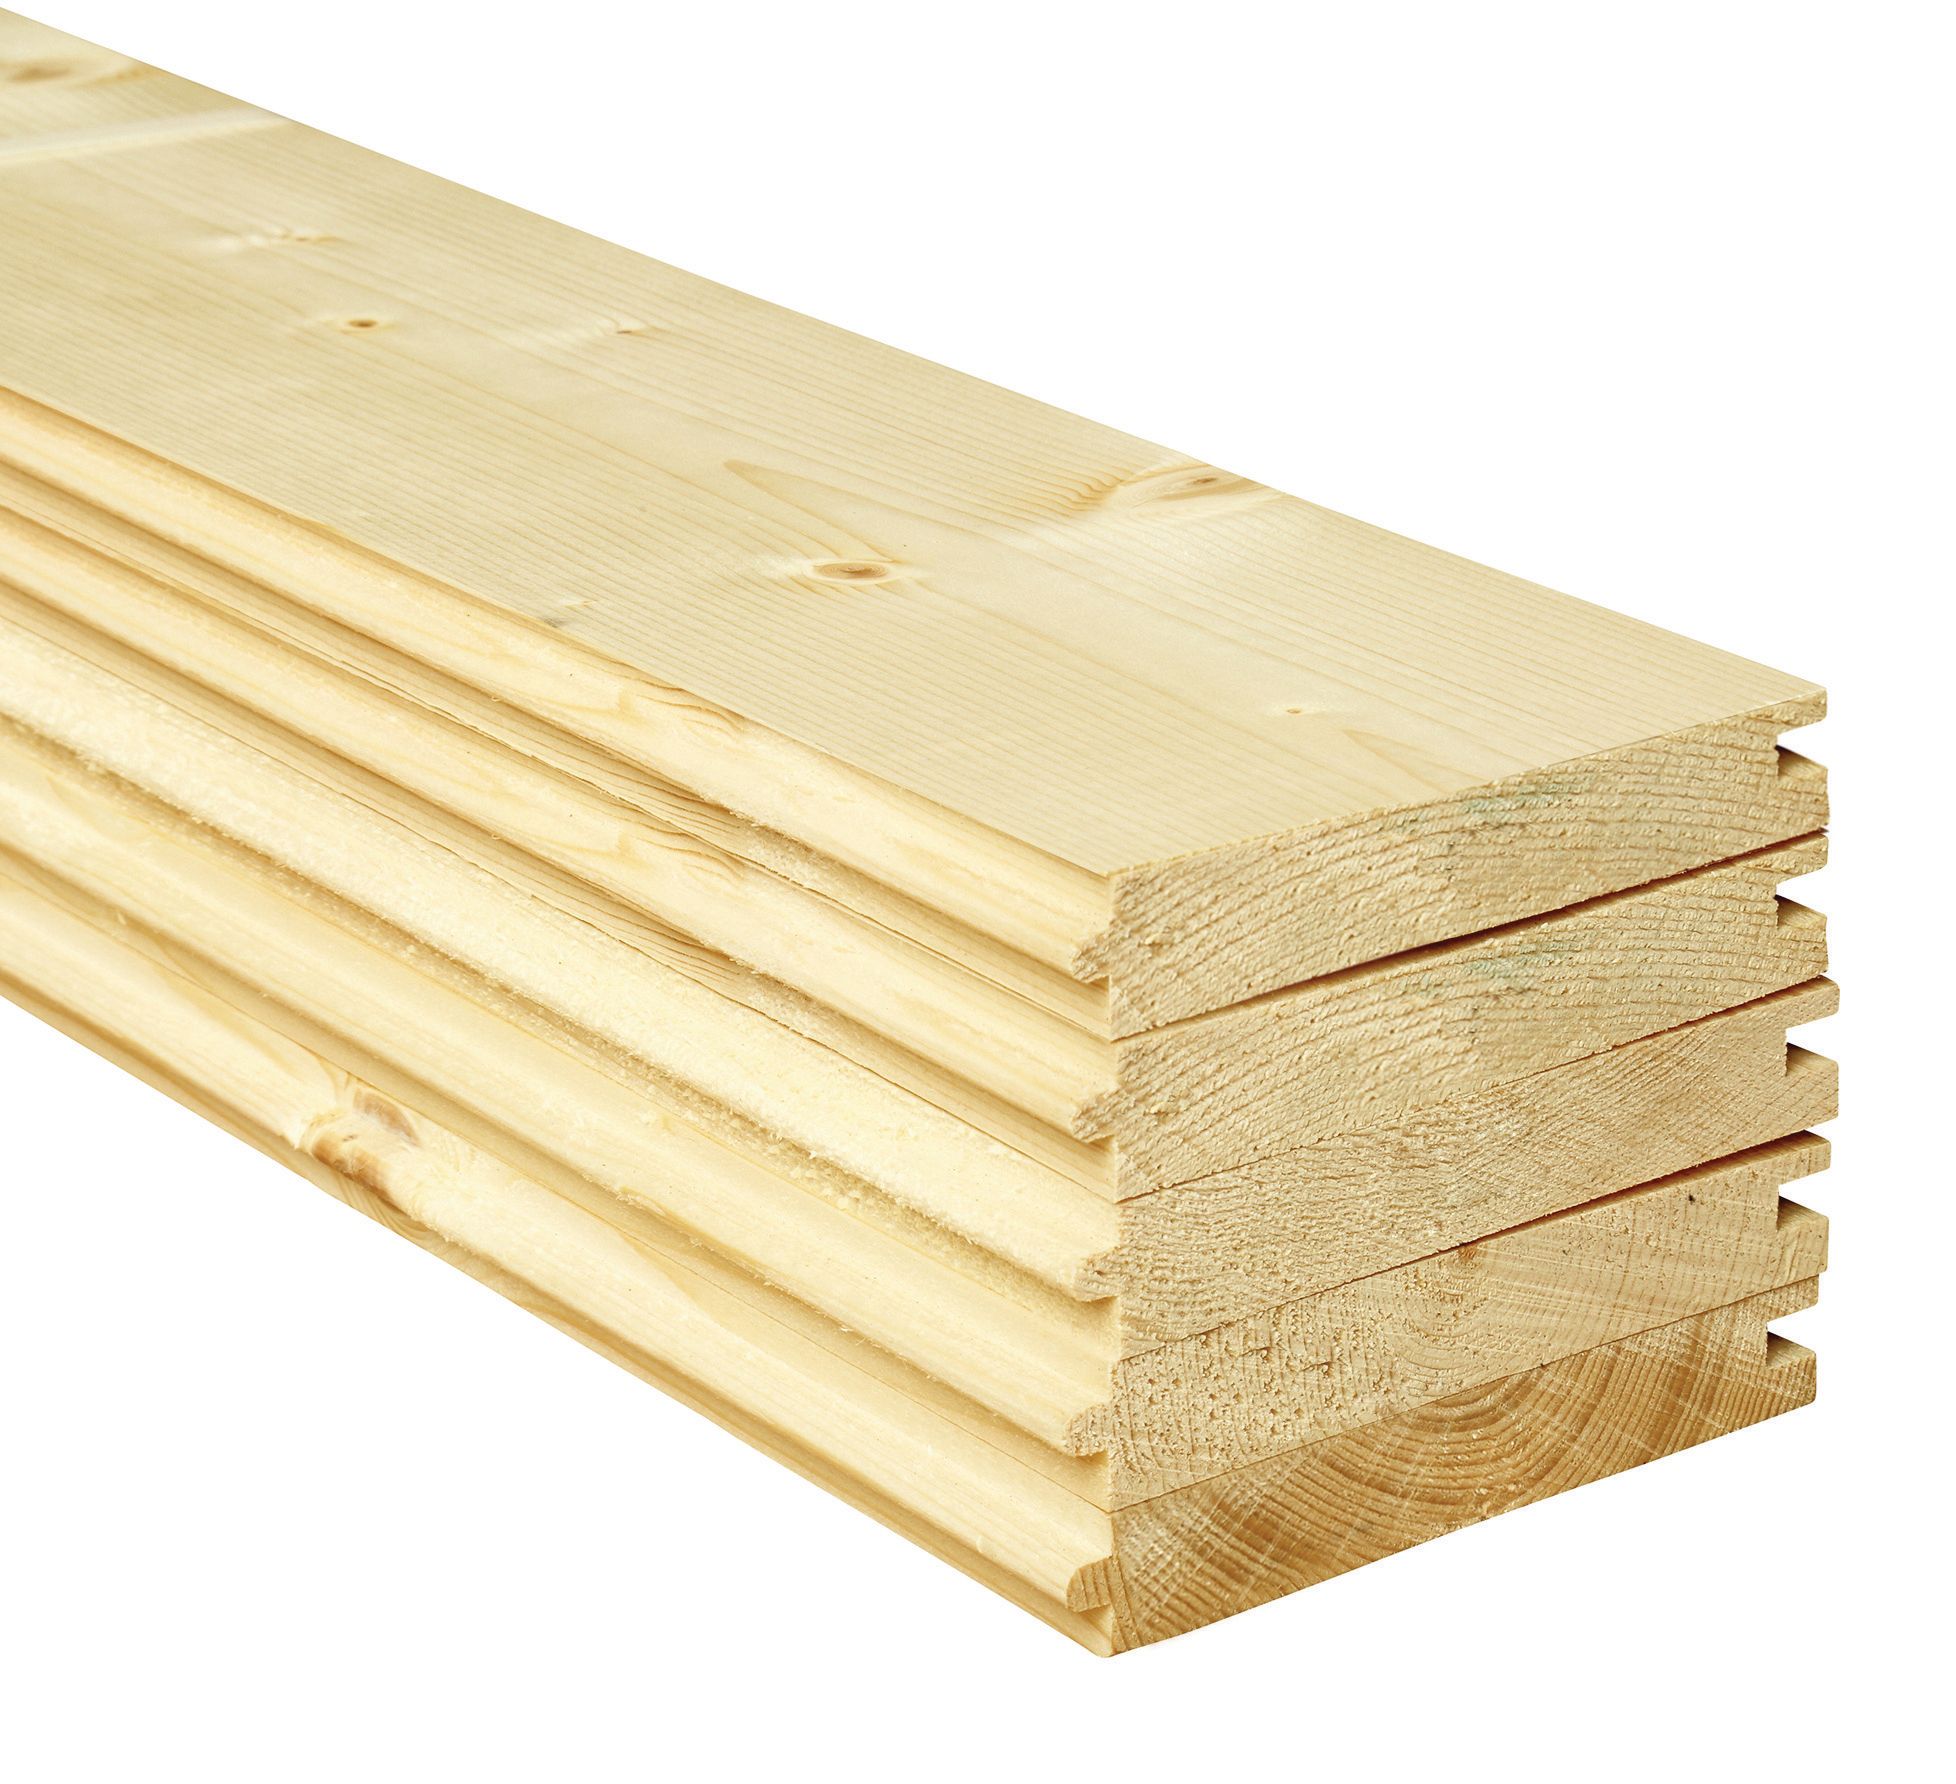 Wickes PTG Timber Floorboards - 18mm x 144mm x 2400mm - Pack of 5